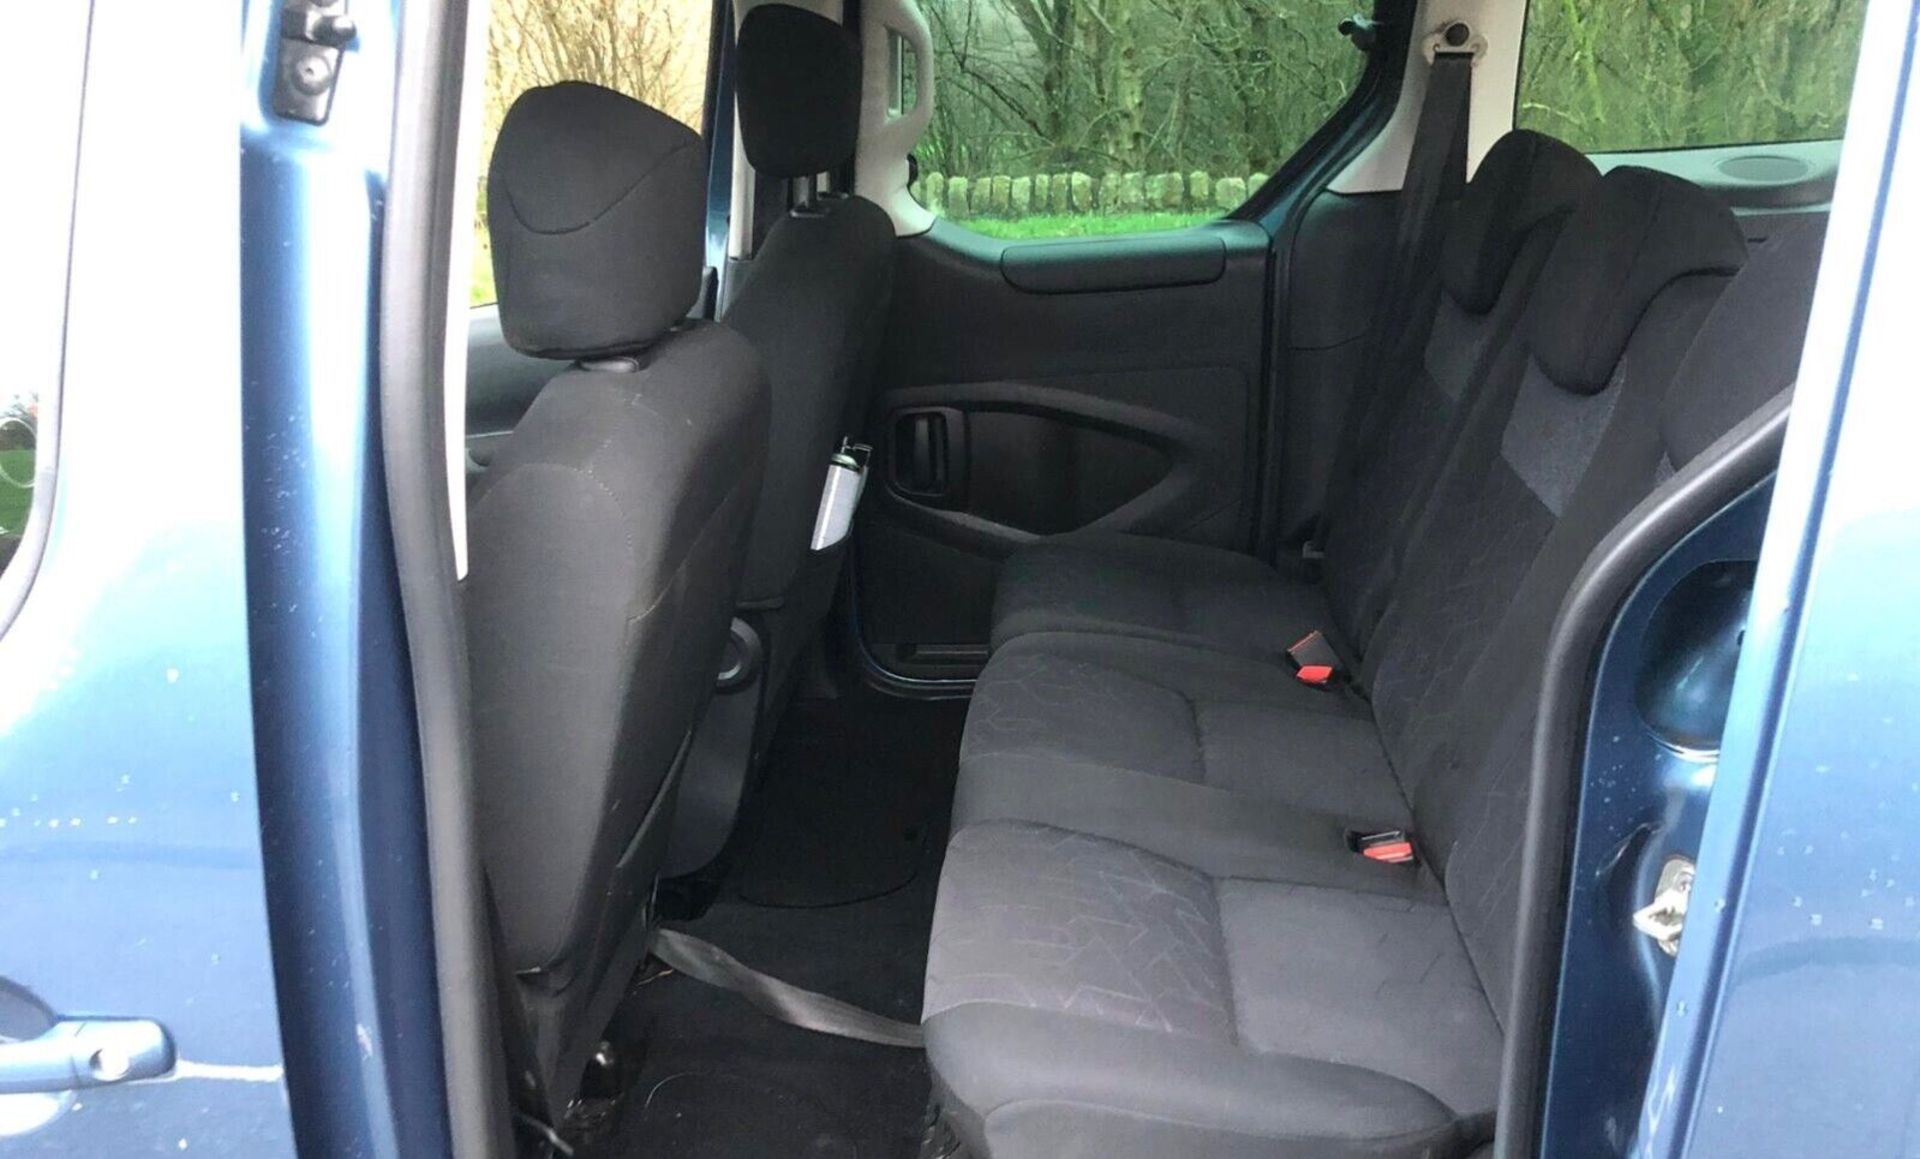 EXCEPTIONAL 2018/18 PEUGEOT PARTNER ACTIVE WHEELCHAIR ACCESSIBLE VEHICLE >>--NO VAT ON HAMMER--<< - Image 11 of 14